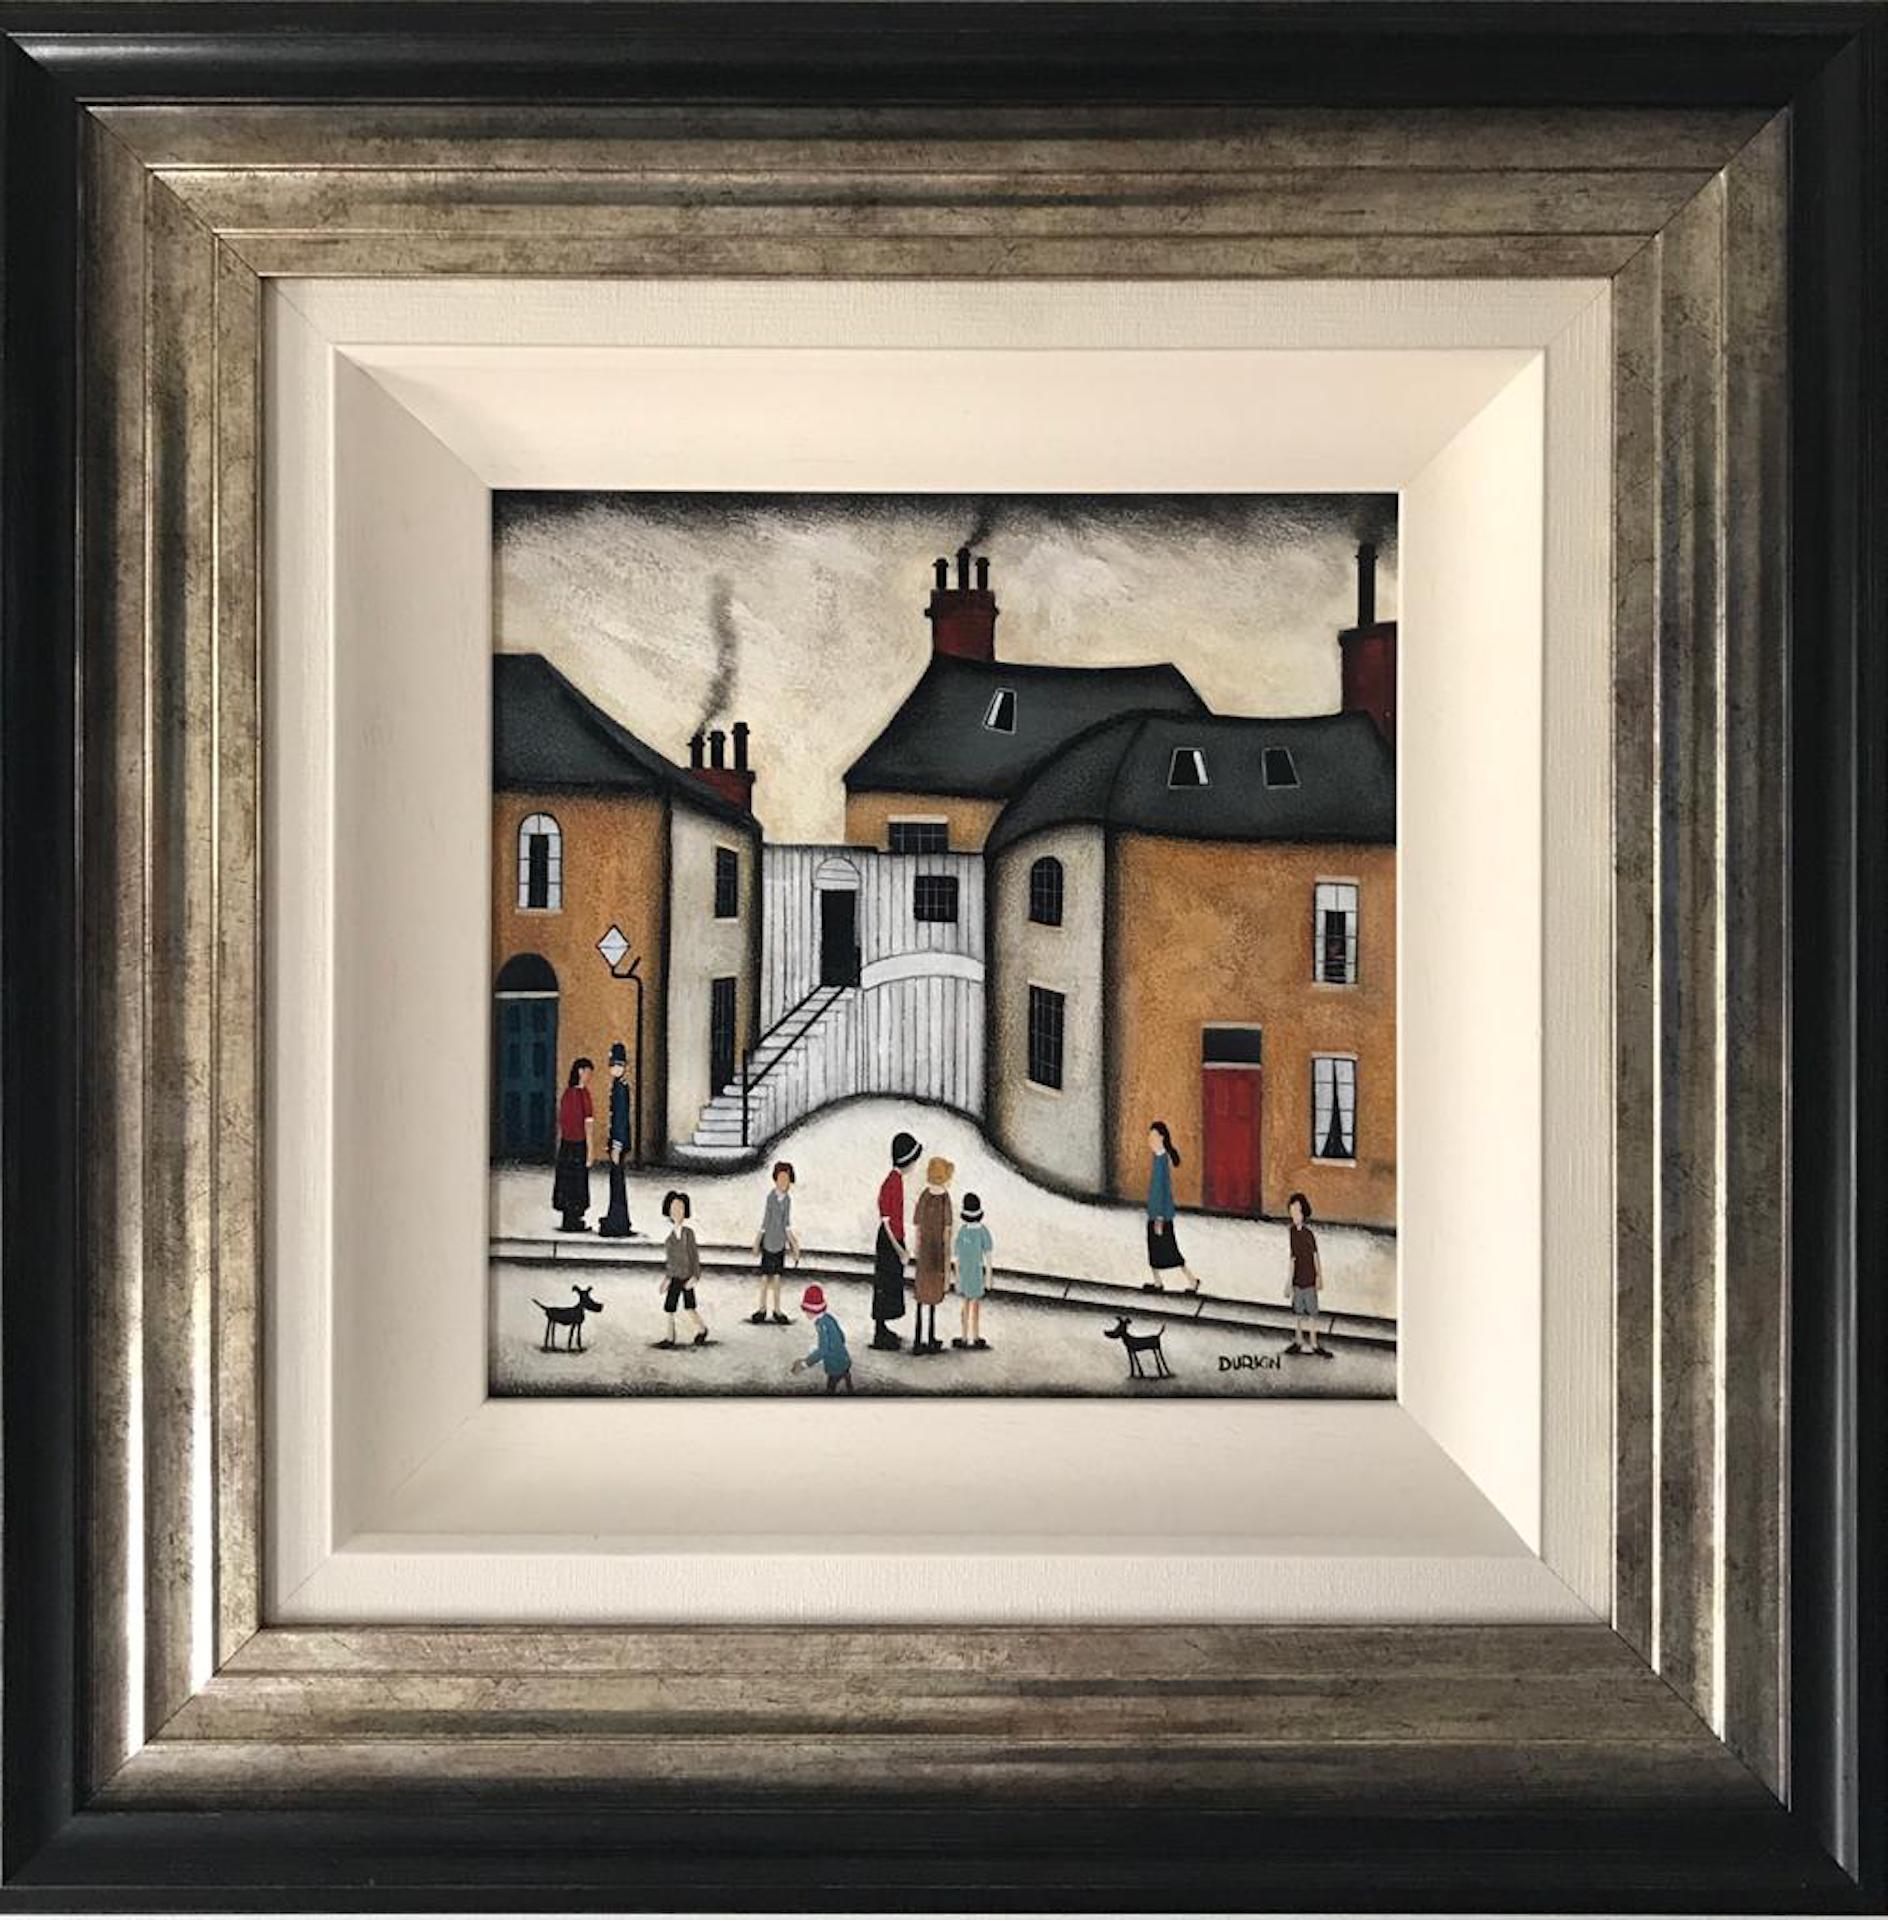 Sean Durkin, Village Life, Contemporary Painting in the Style of Lowry